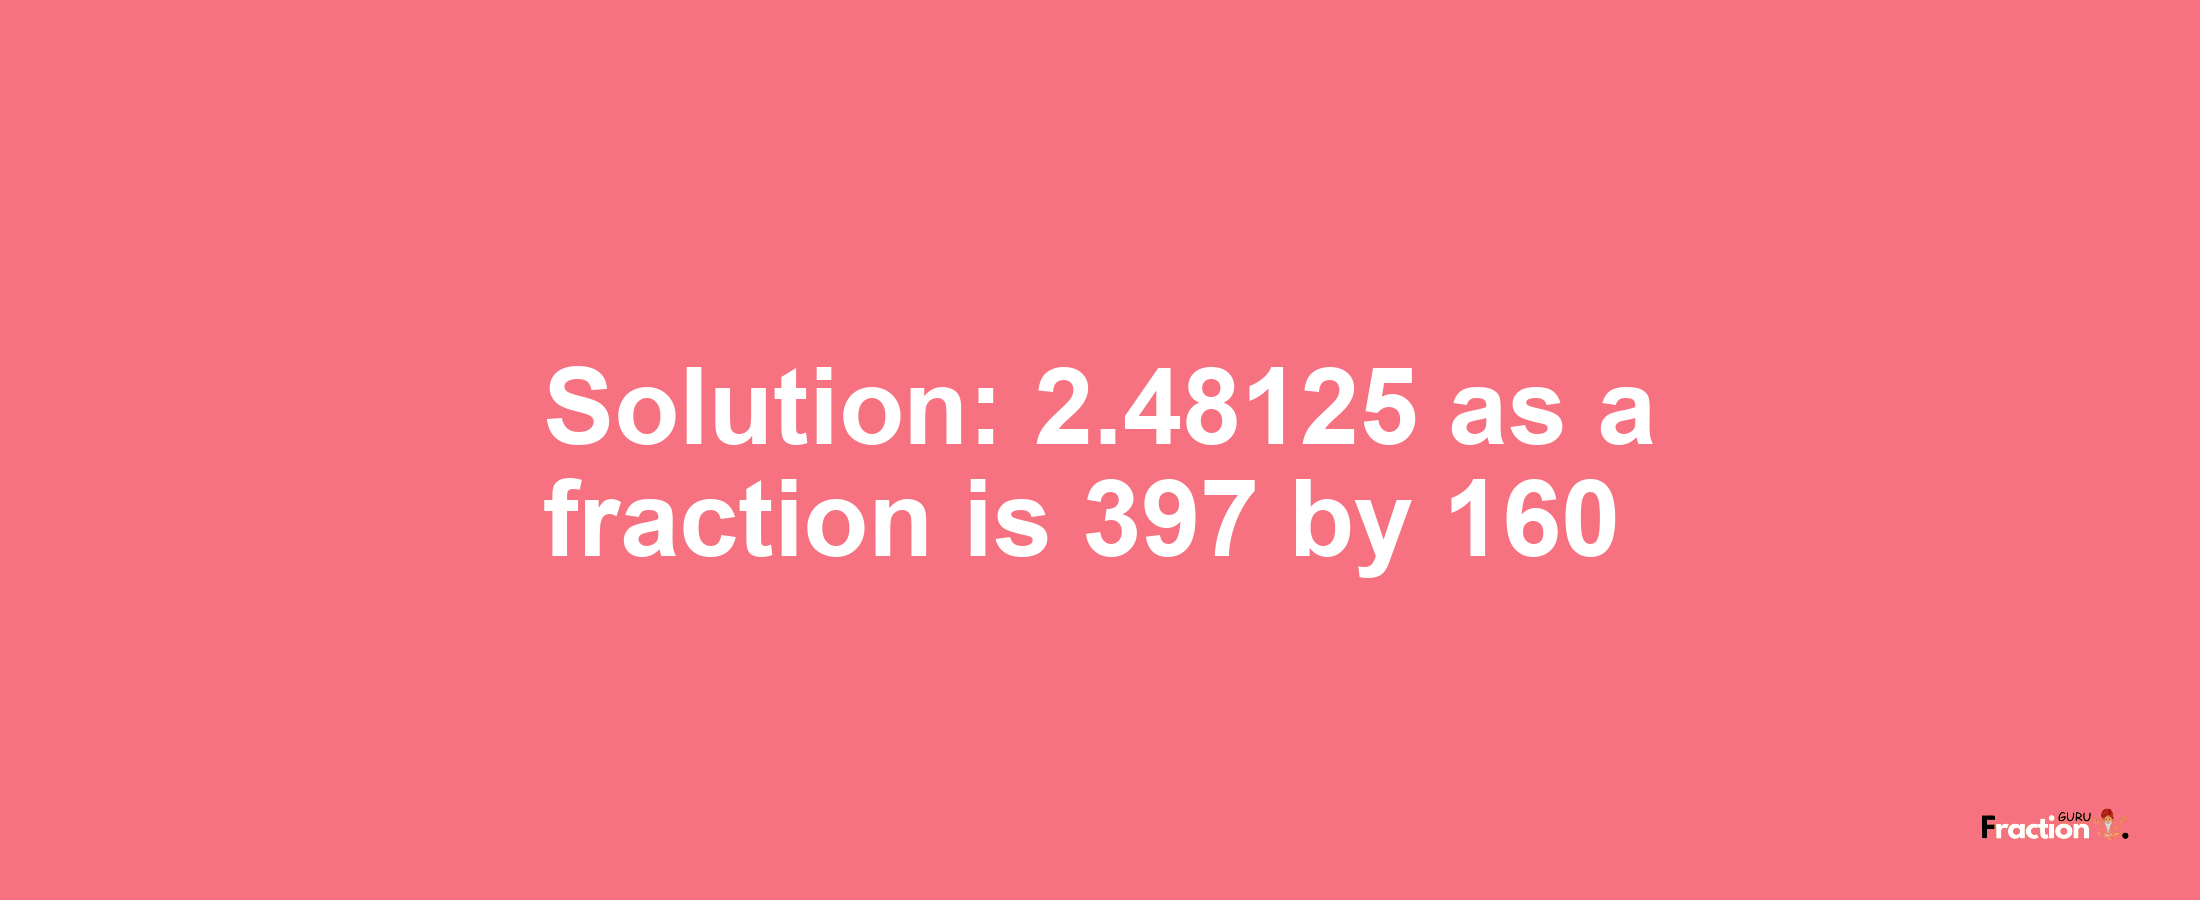 Solution:2.48125 as a fraction is 397/160